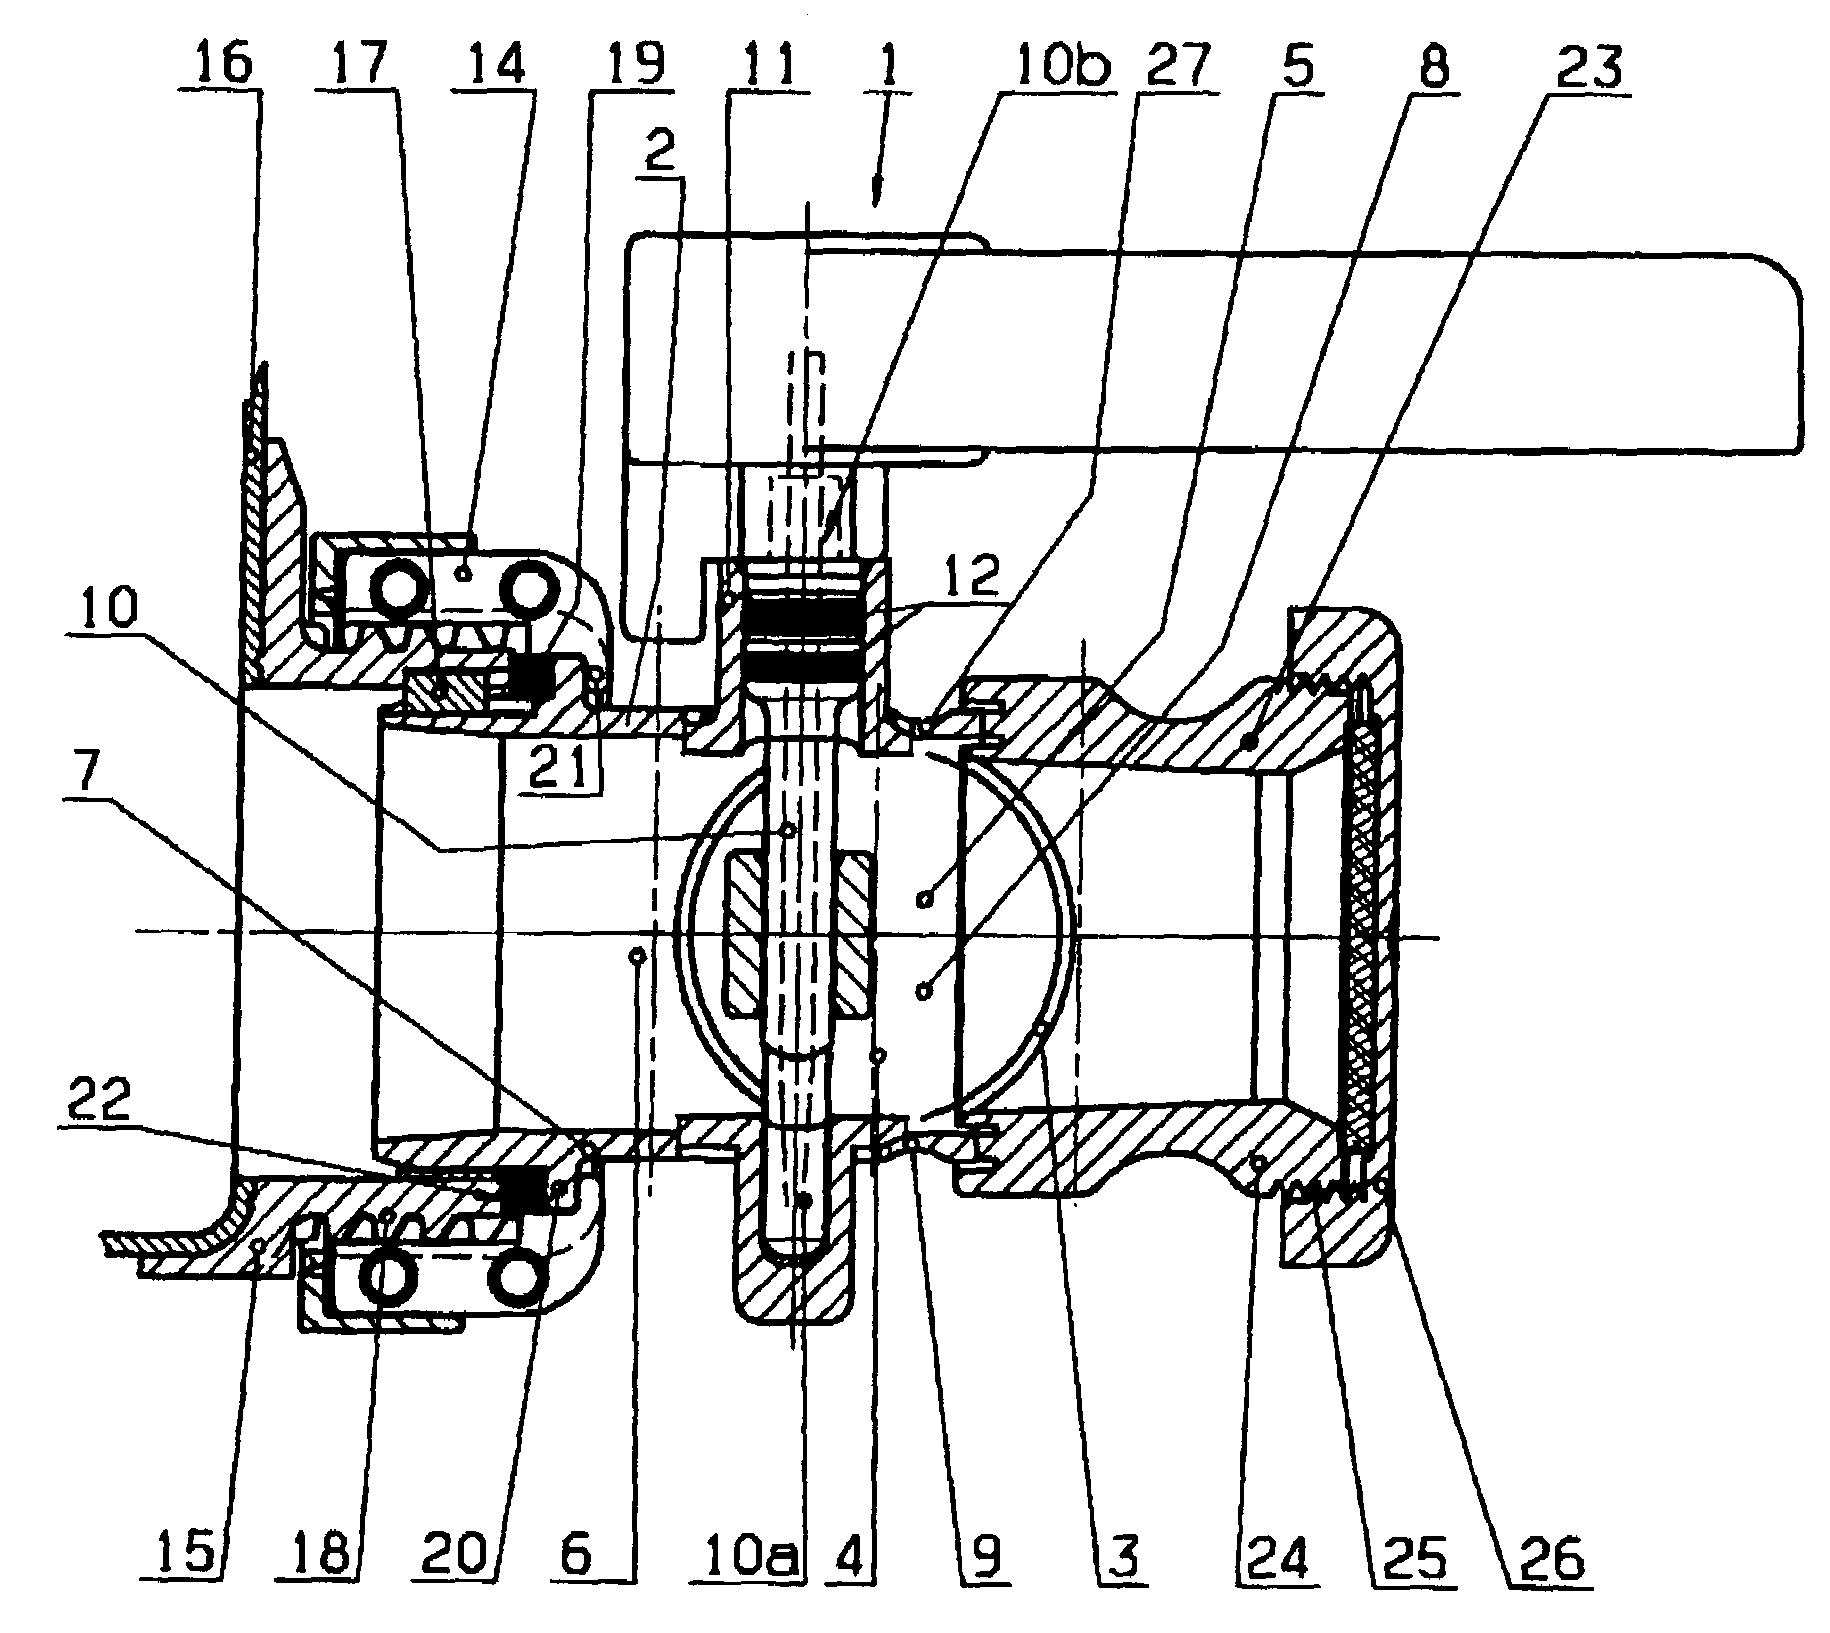 Tapping valve of plastics material for transport and storage containers for liquids